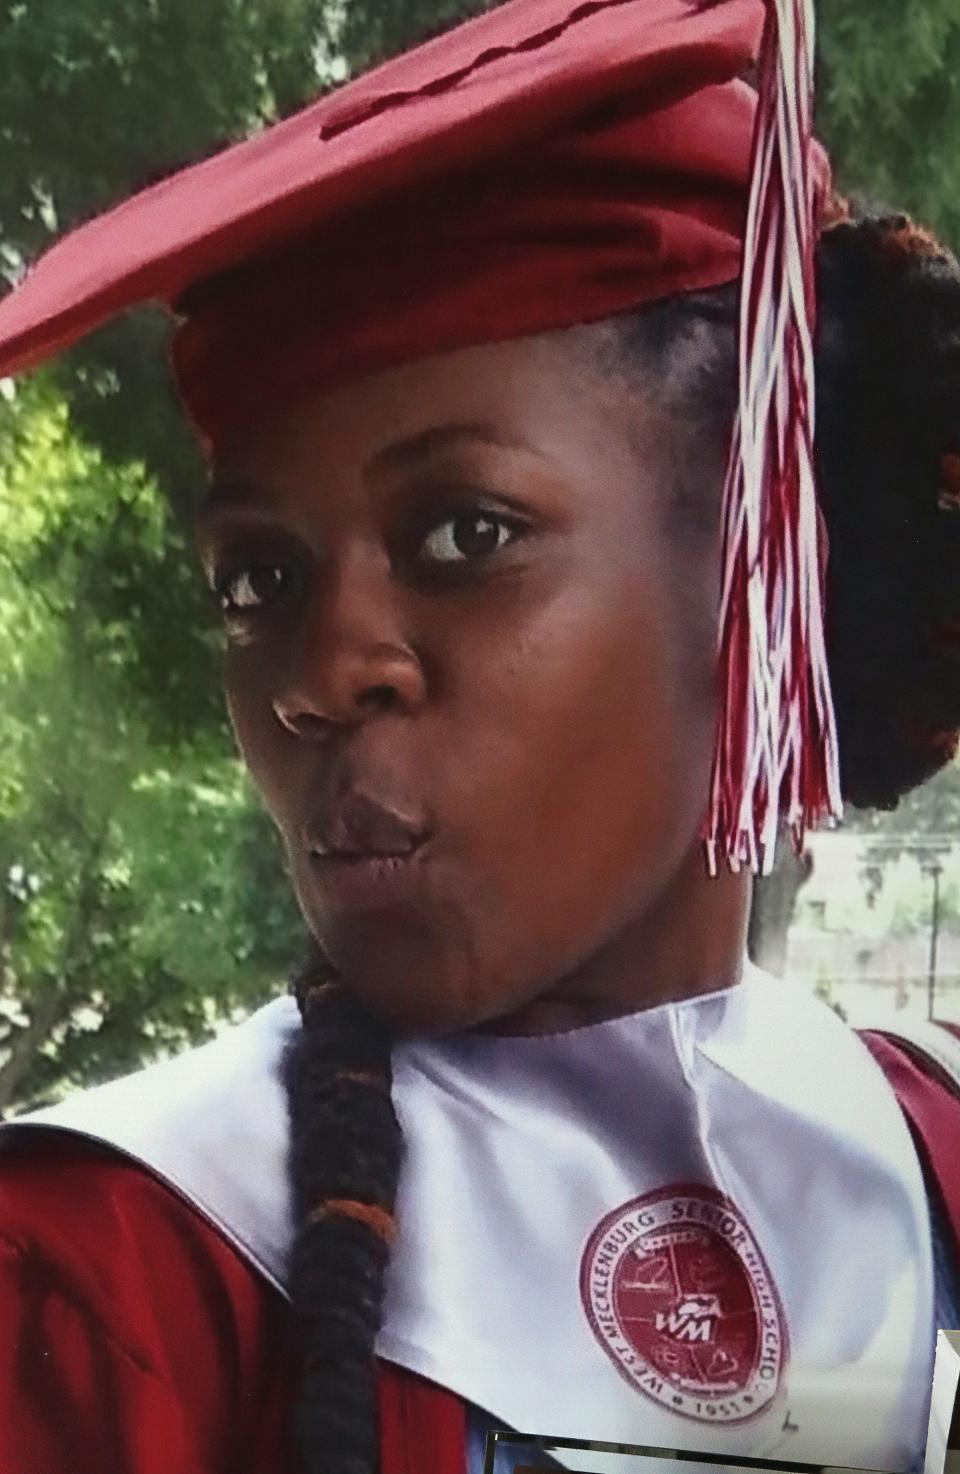 Cell phone photo of Anndel Taylor when she graduated West Mecklenburg High School in North Carolina. Her mother, Wanda Brown Steele, says this is among her favorite pictures of her daughter.